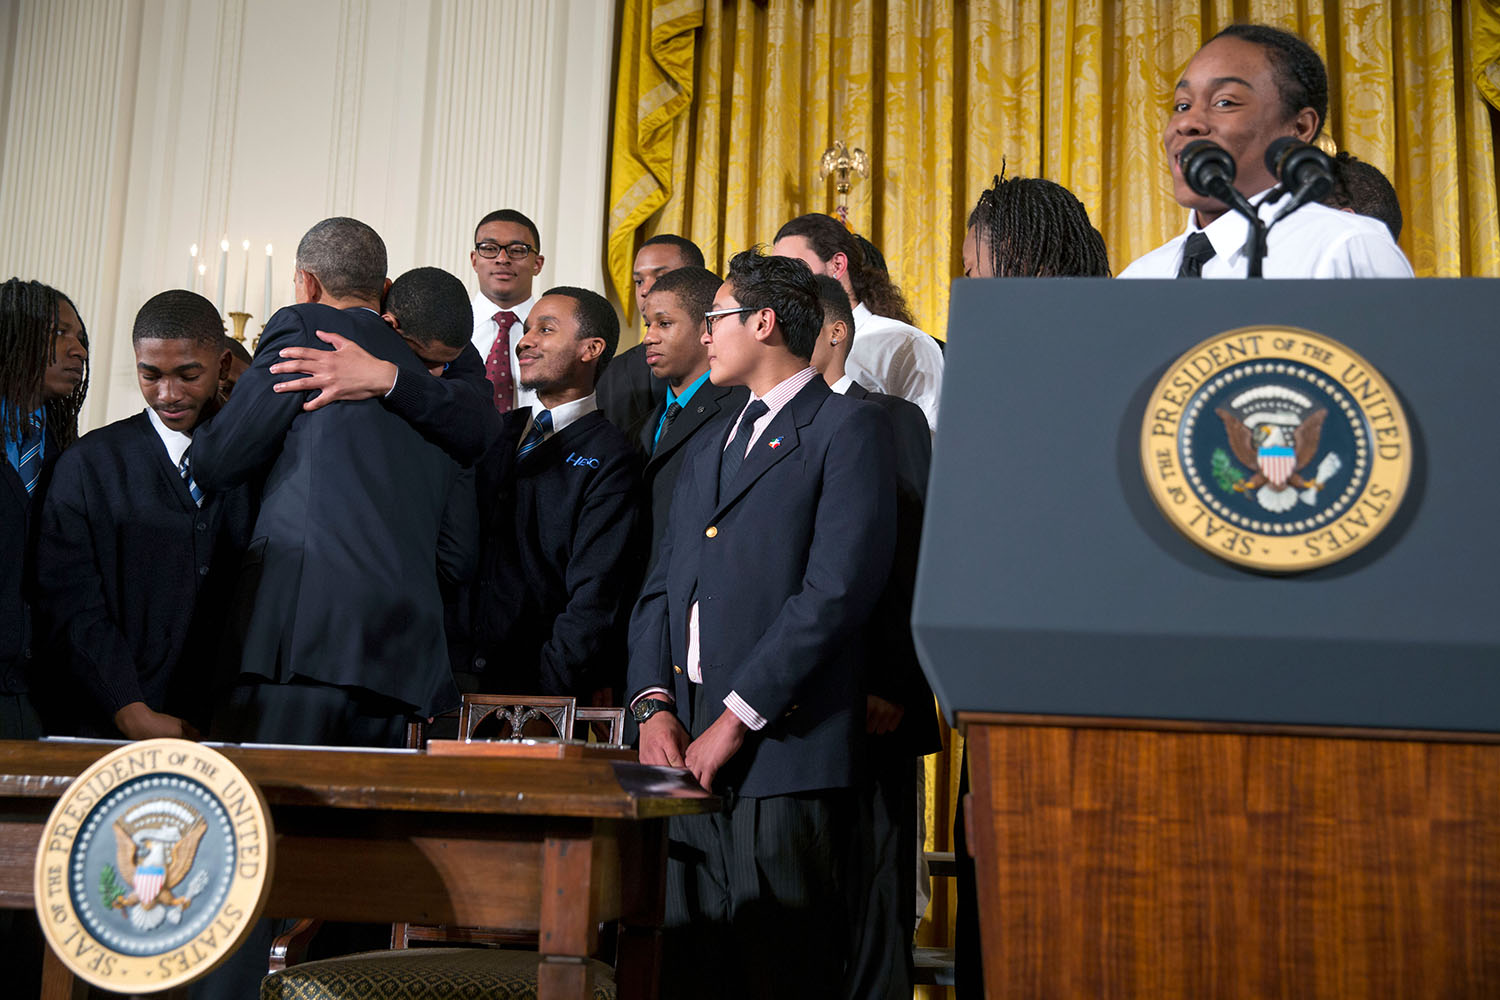 President Obama speaks on My Brother's Keeper